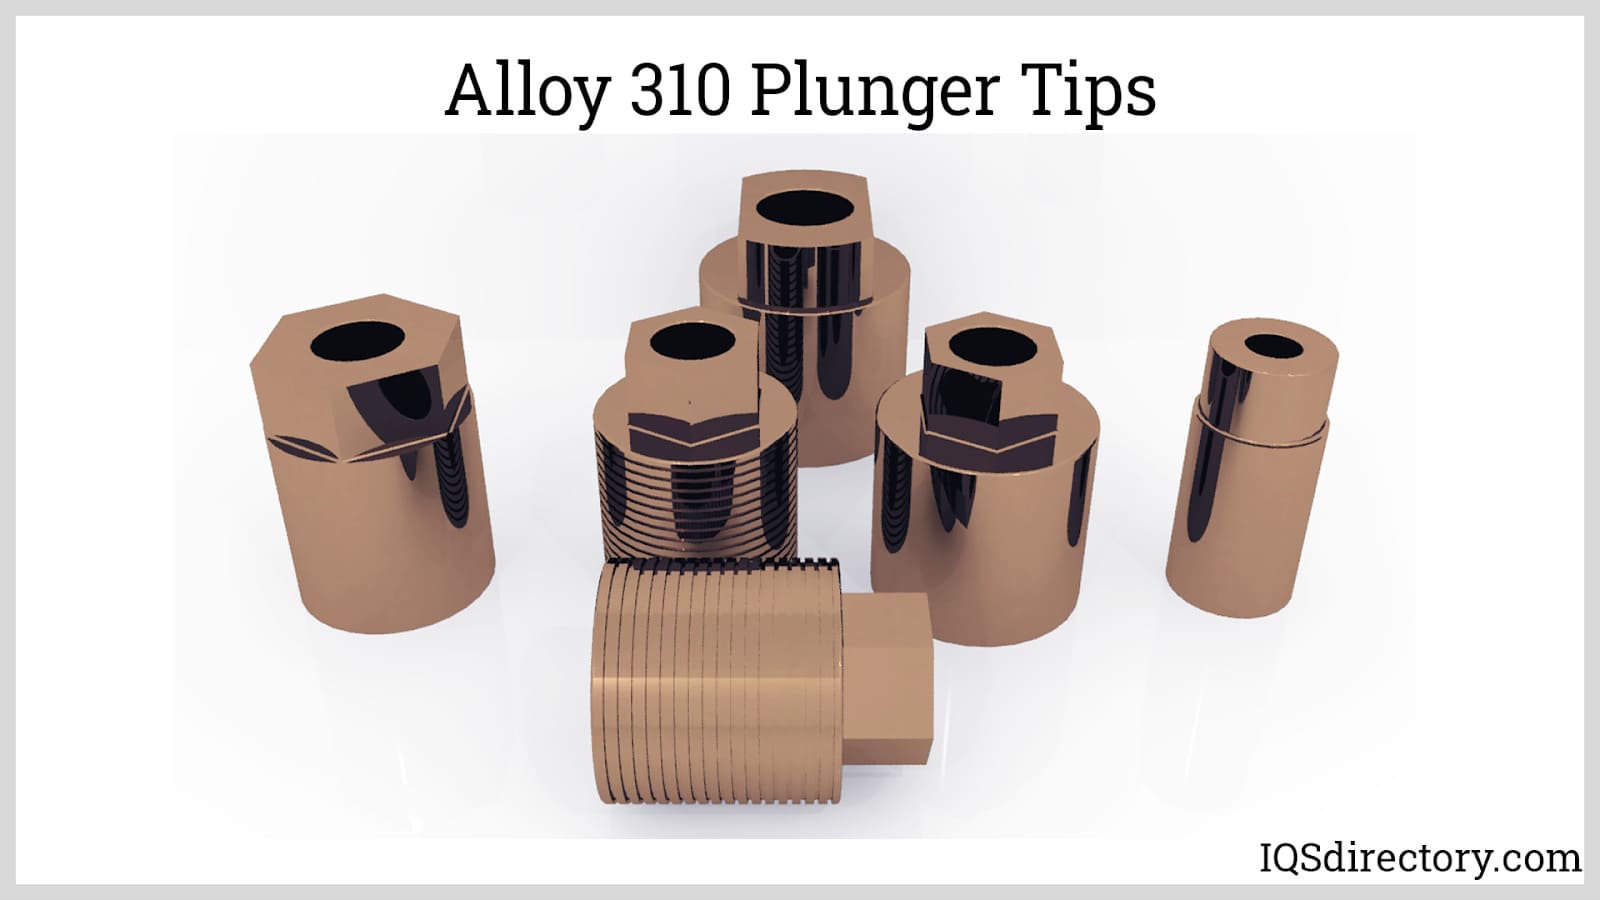 Alloy 310 Plunger Tips